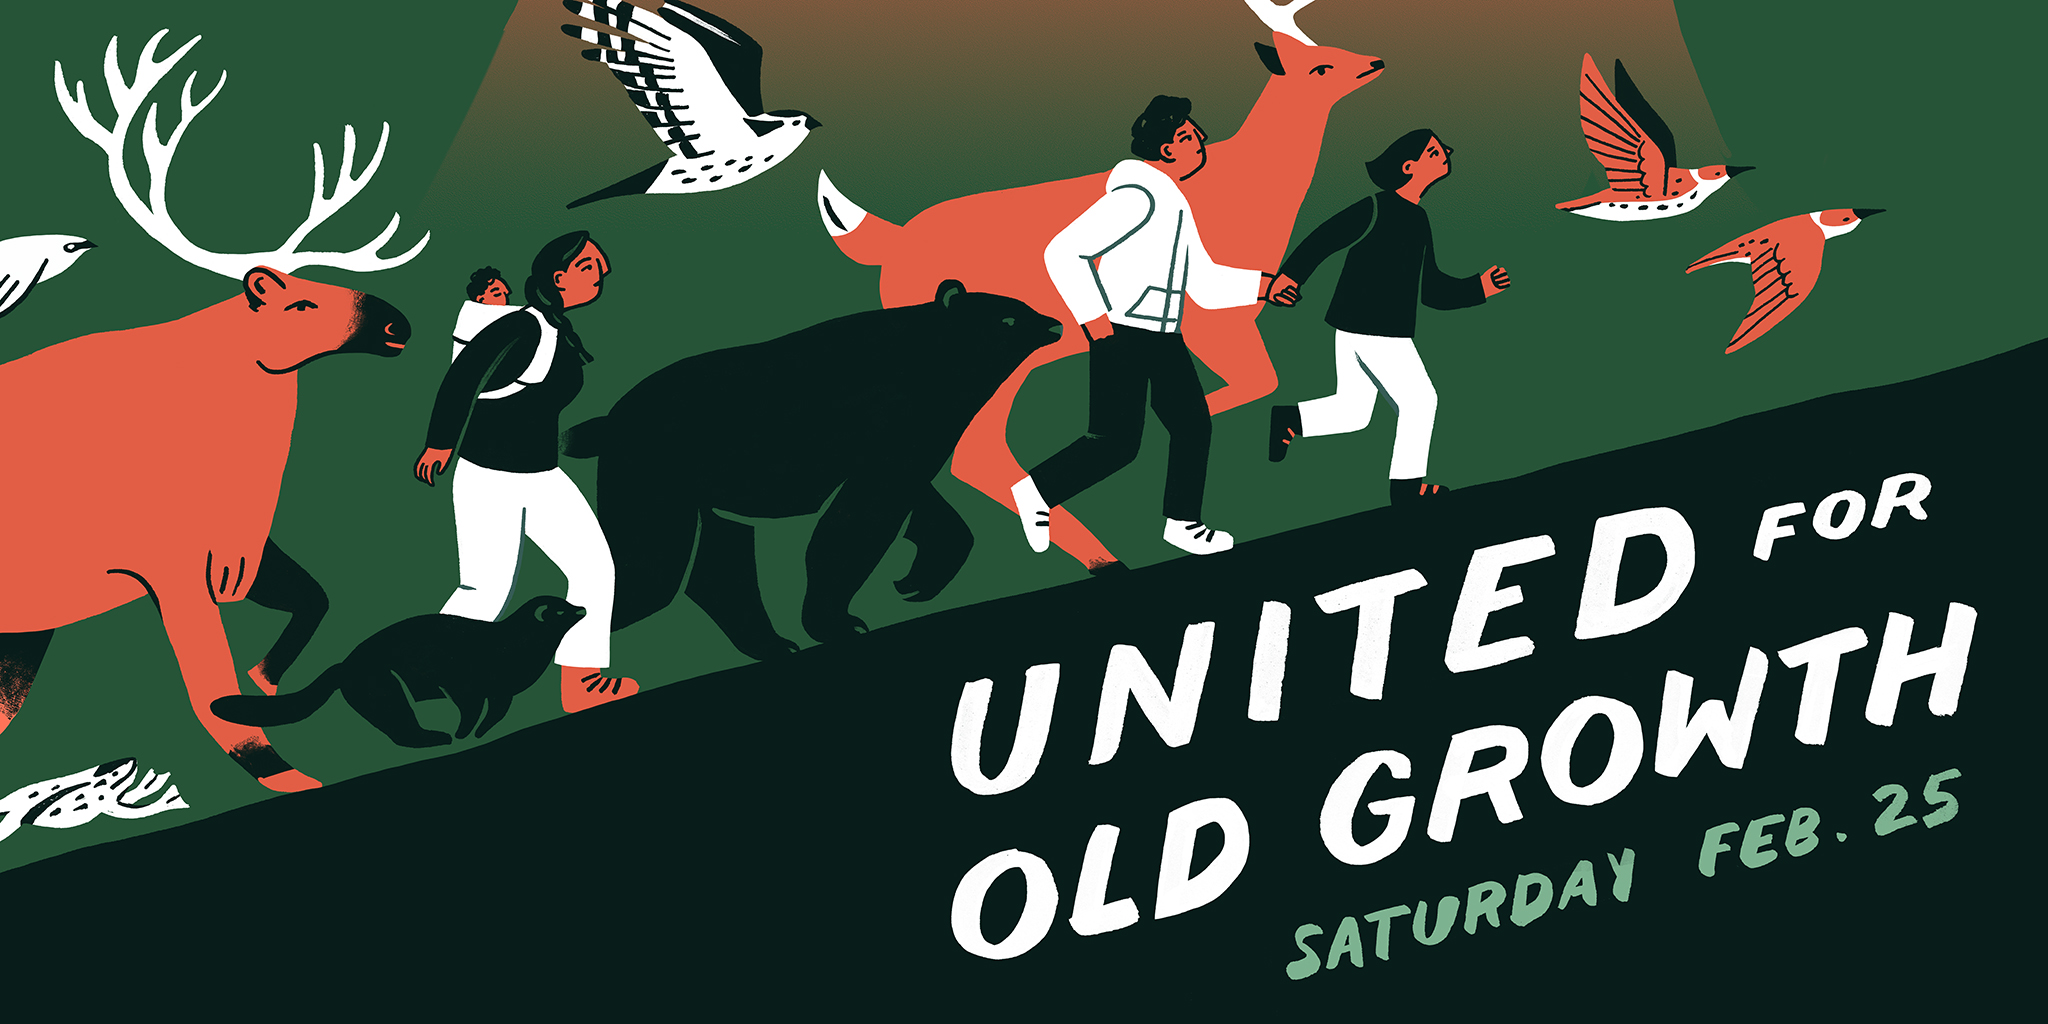 A hand drawn poster of humans running along with caribou, bears and other animals. Text on the poster says "United for Old Growth". End of image description.